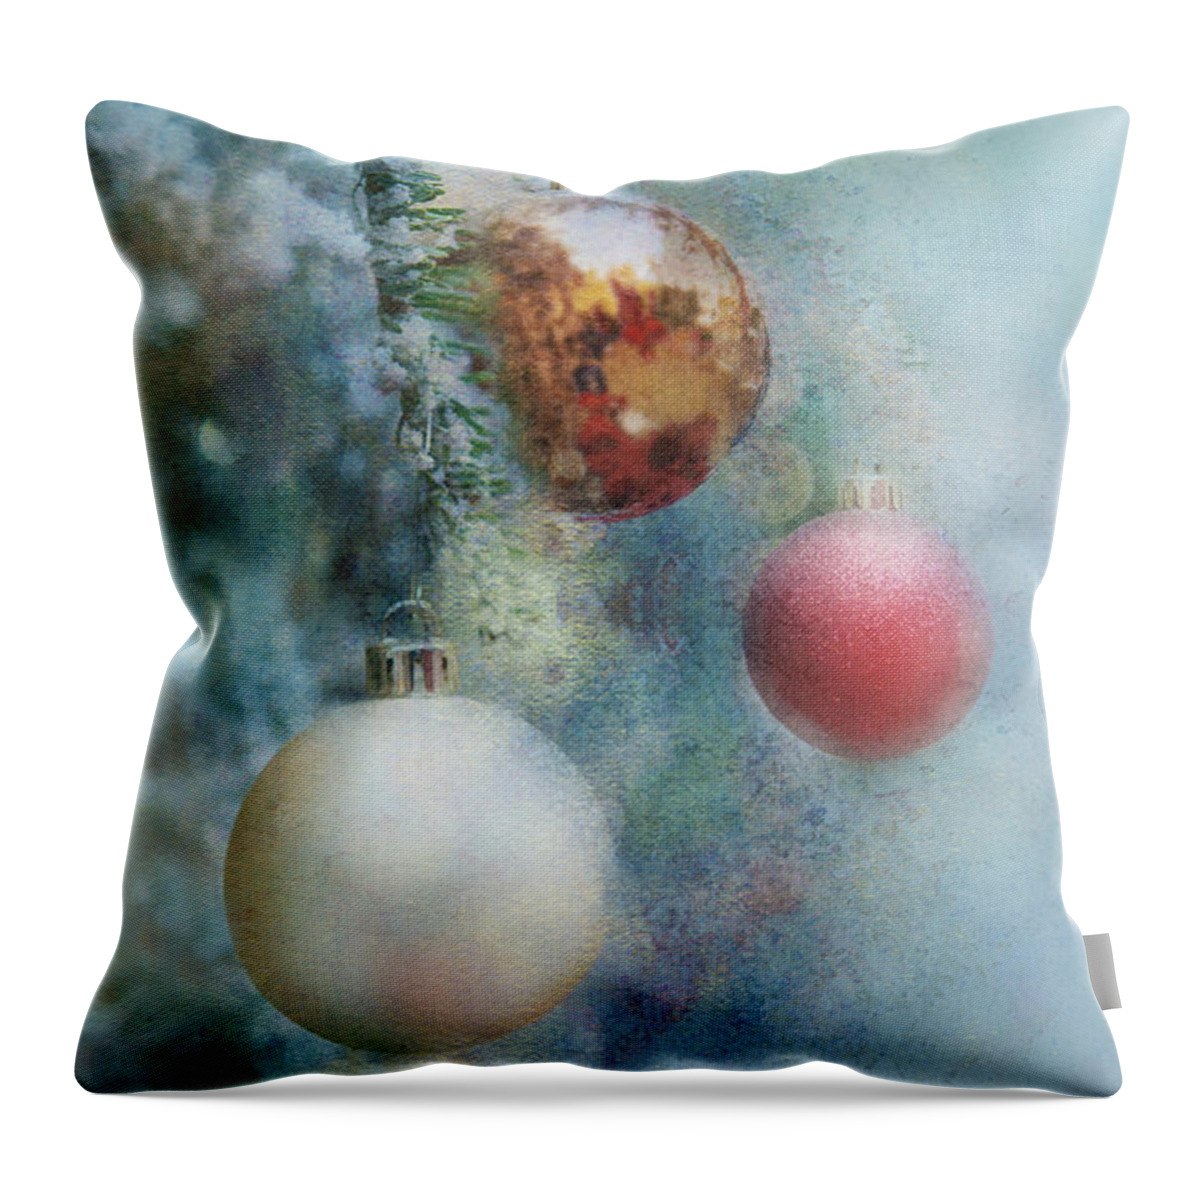 Christmas Throw Pillow featuring the photograph Christmas - Ornaments by Nikolyn McDonald